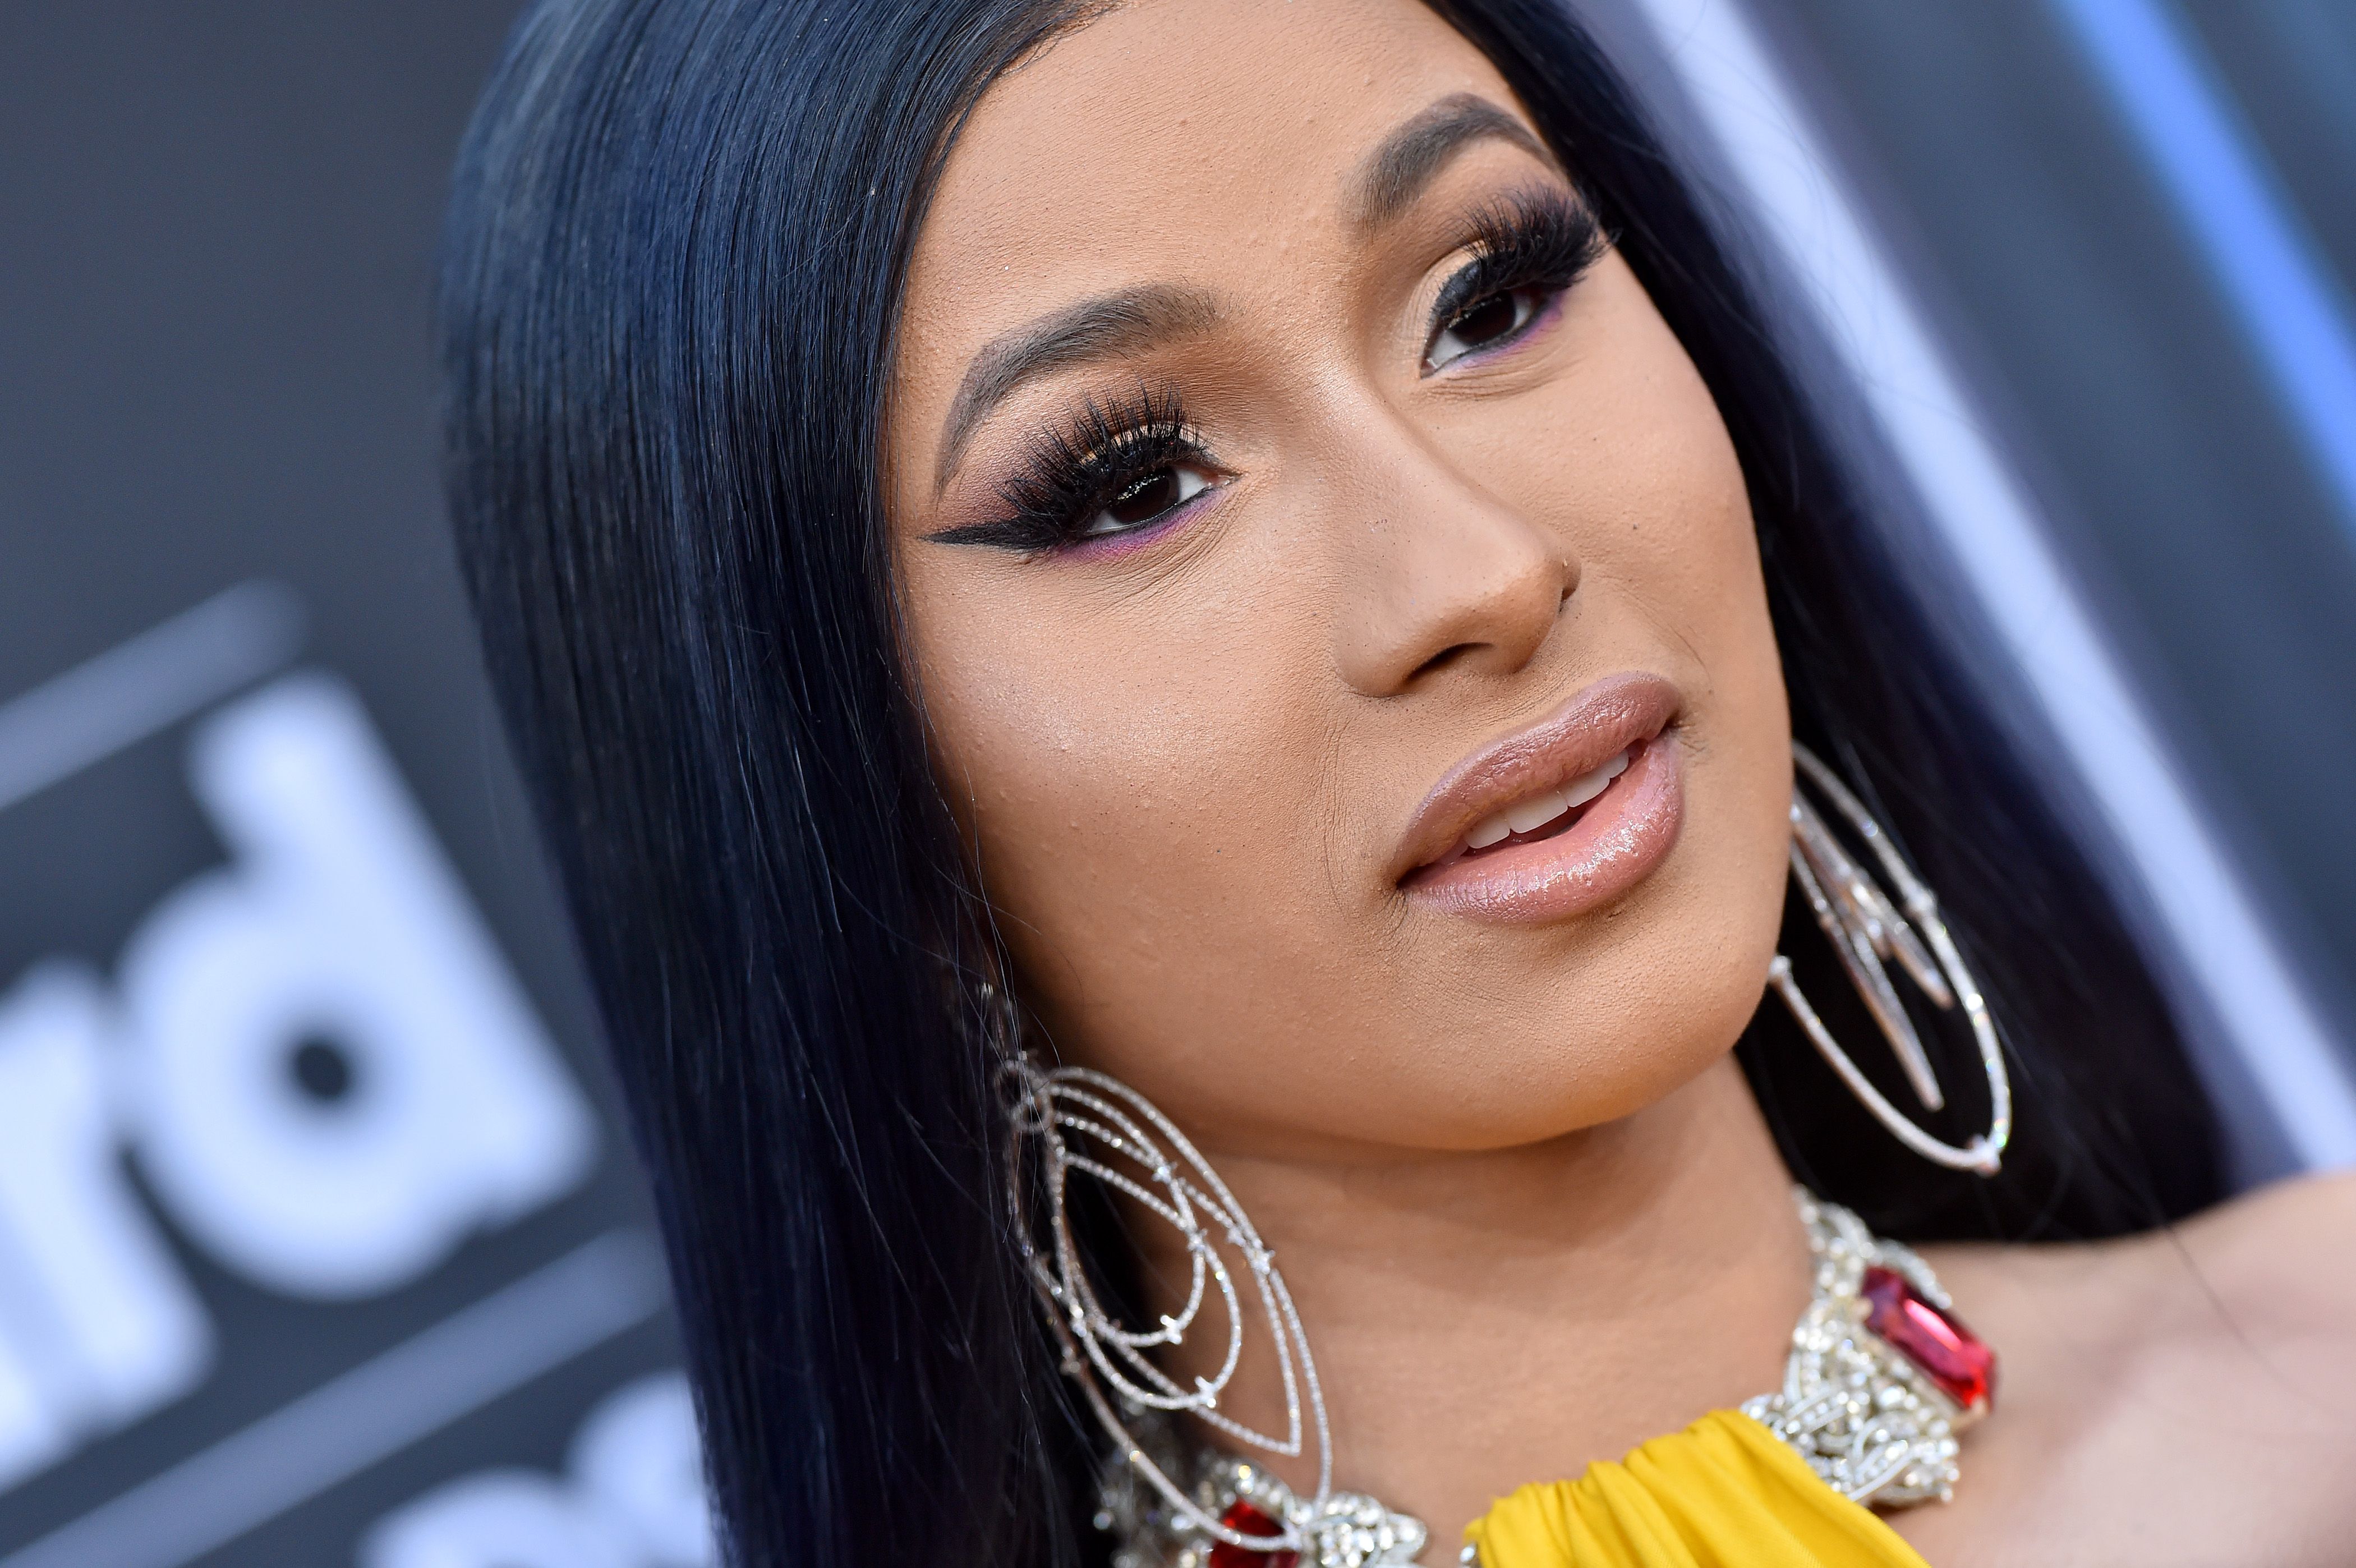 Cardi B Makes History With Her Latest Single Up